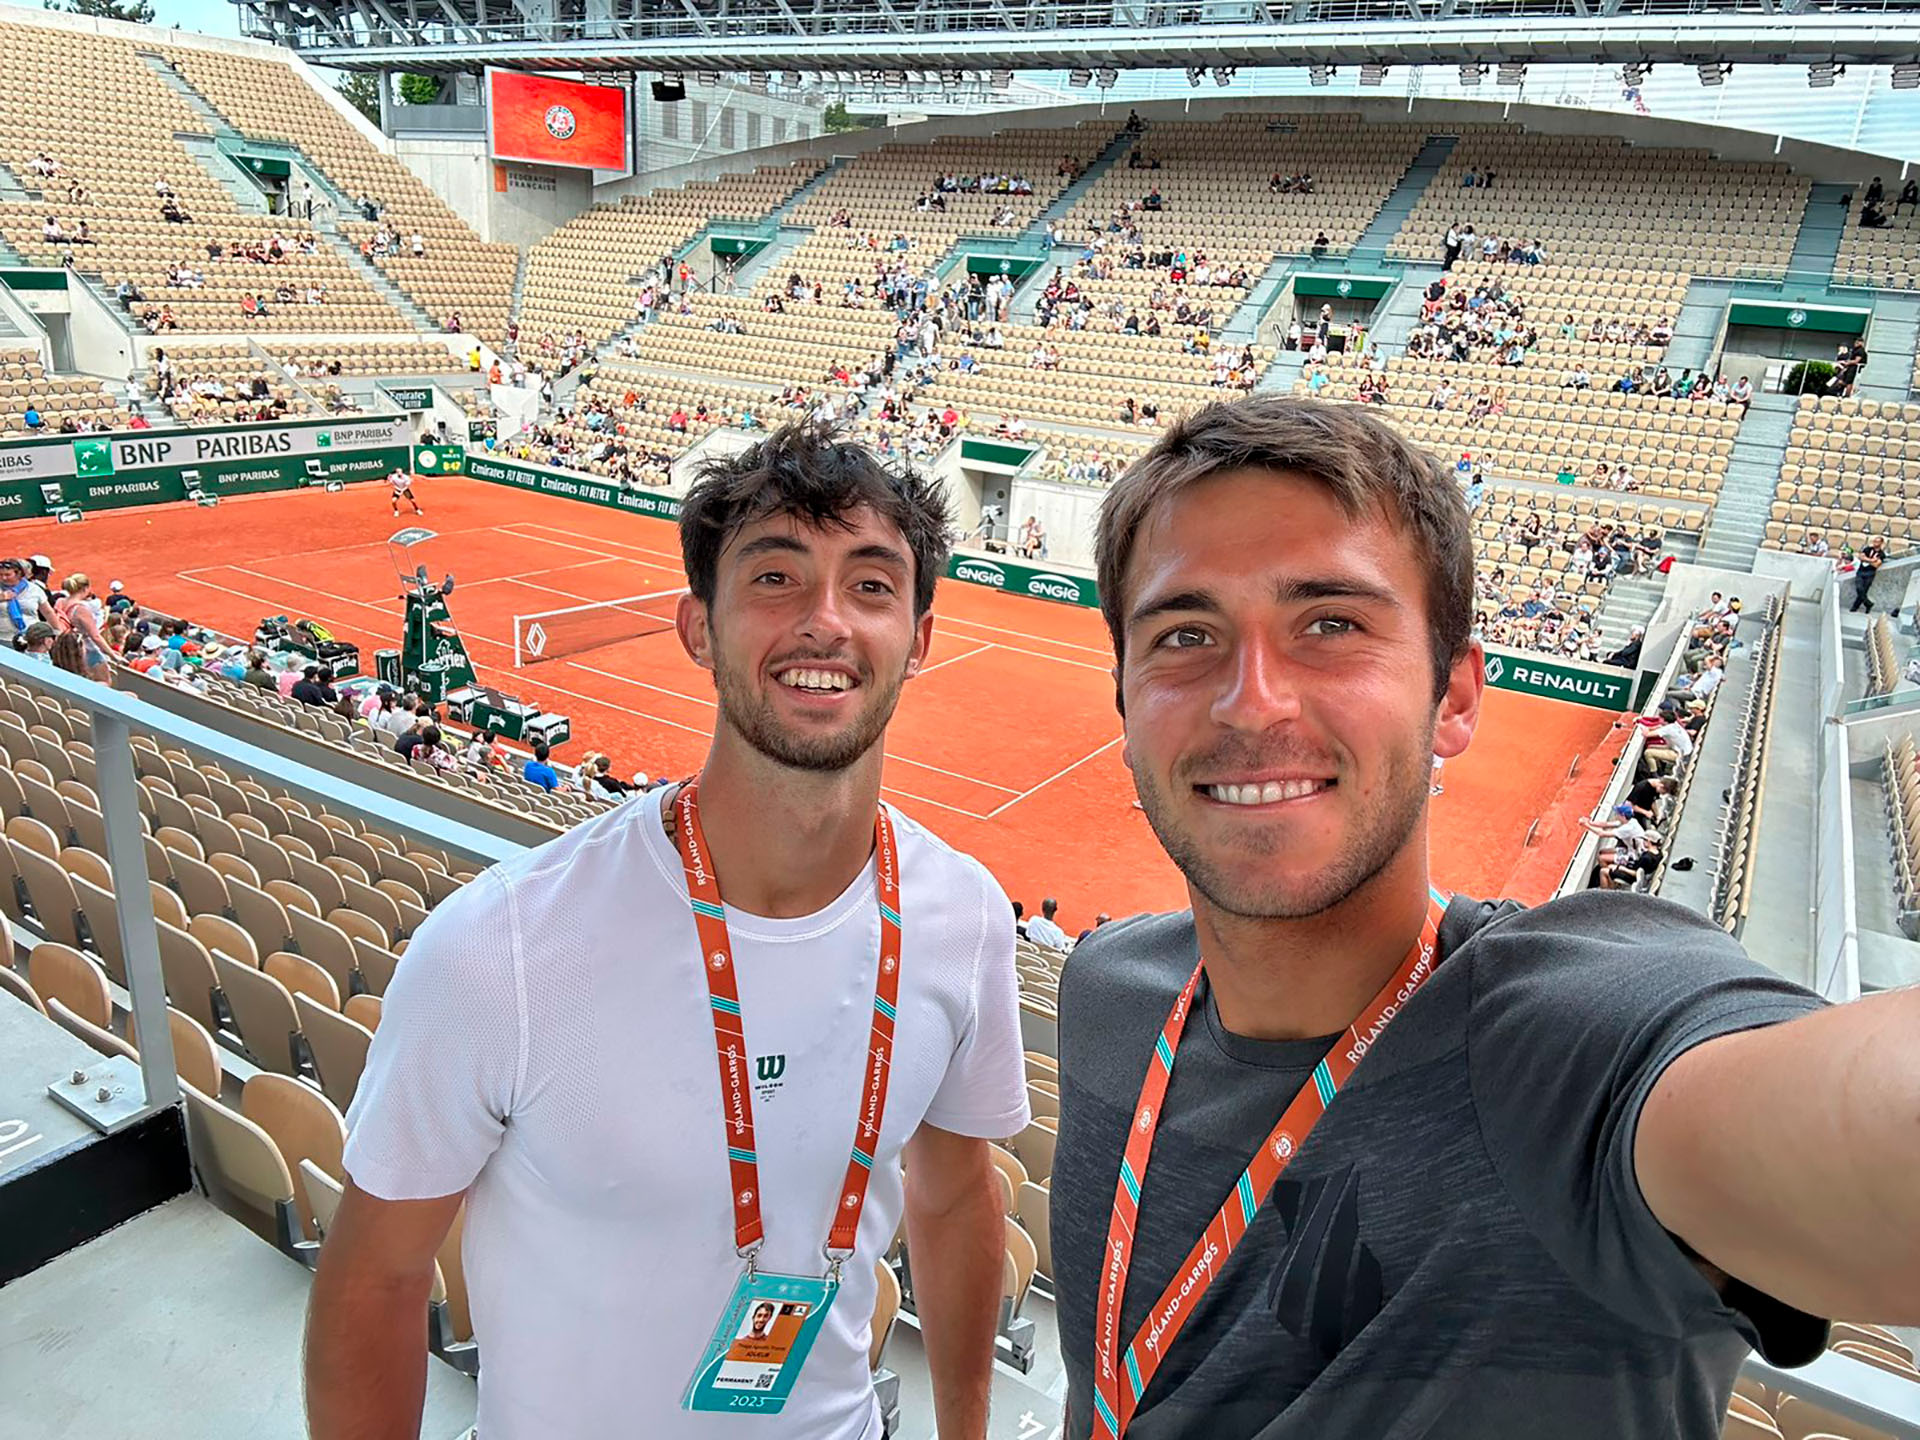 Thiago Tirante and Tomás Etcheverry, two Argentines who dream of making history at Roland Garros 